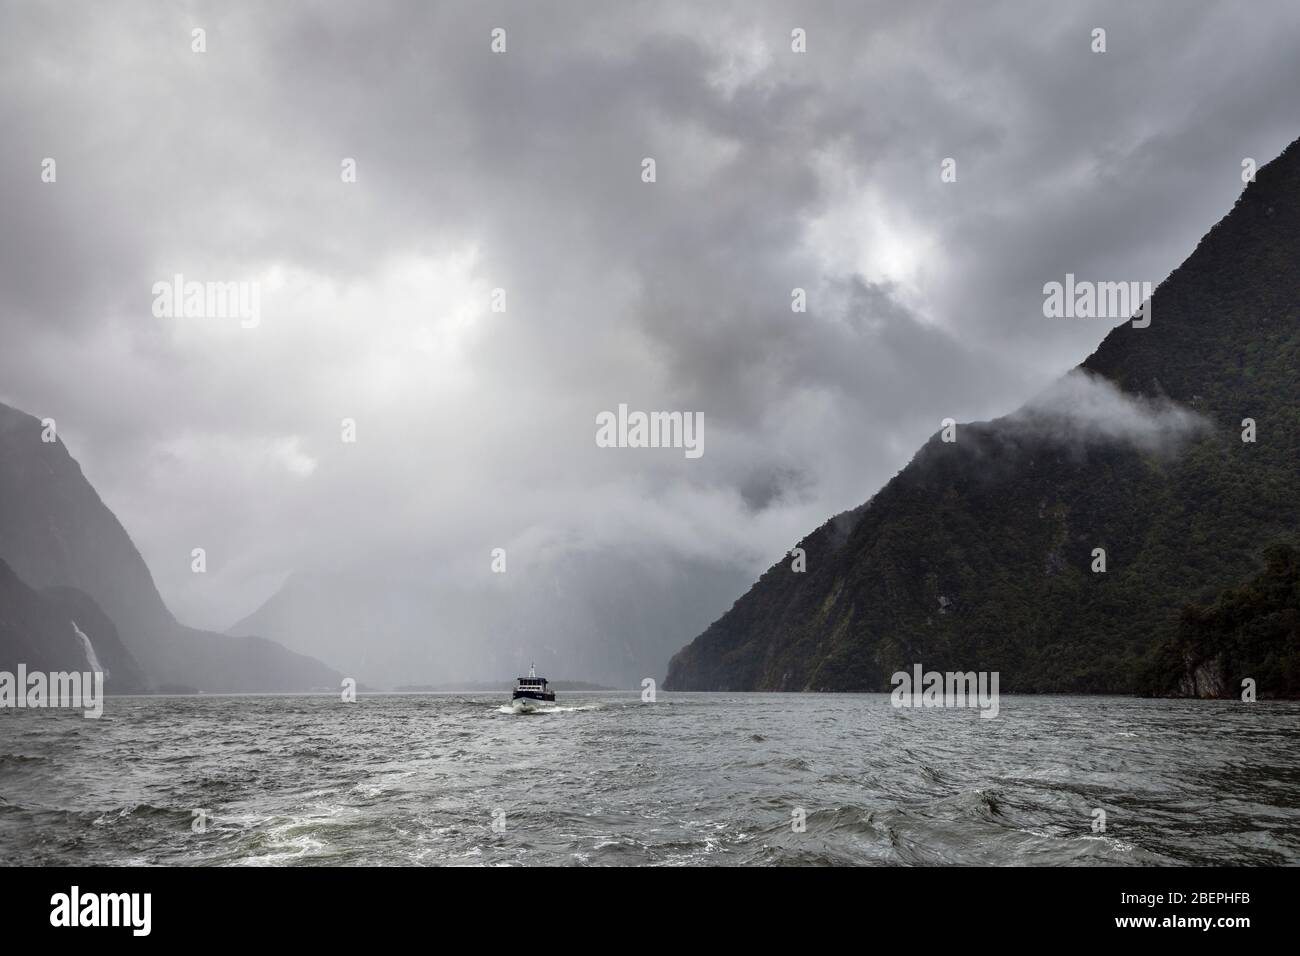 Milford Sound with Mitre Peak obscured by cloud on a stormy day, Fiordland National Park, South Island, New Zealand Stock Photo